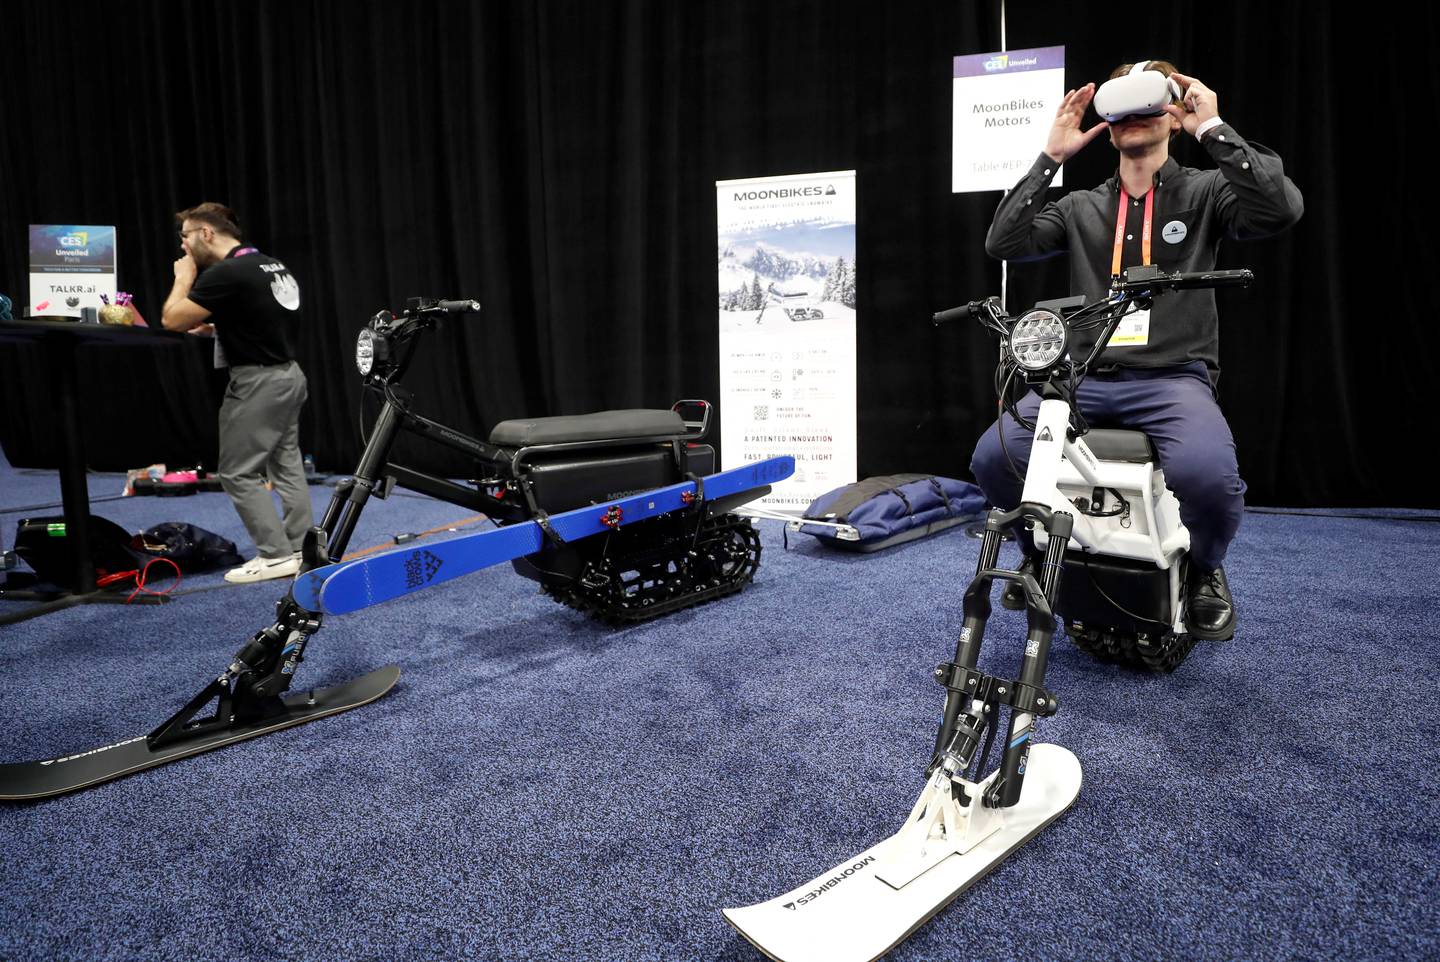 Gaston LaChaize of Moonbikes Motors uses virtual-reality goggles as he sits on an electric snowbike during the CES Unveiled press event in Las Vegas. Reuters